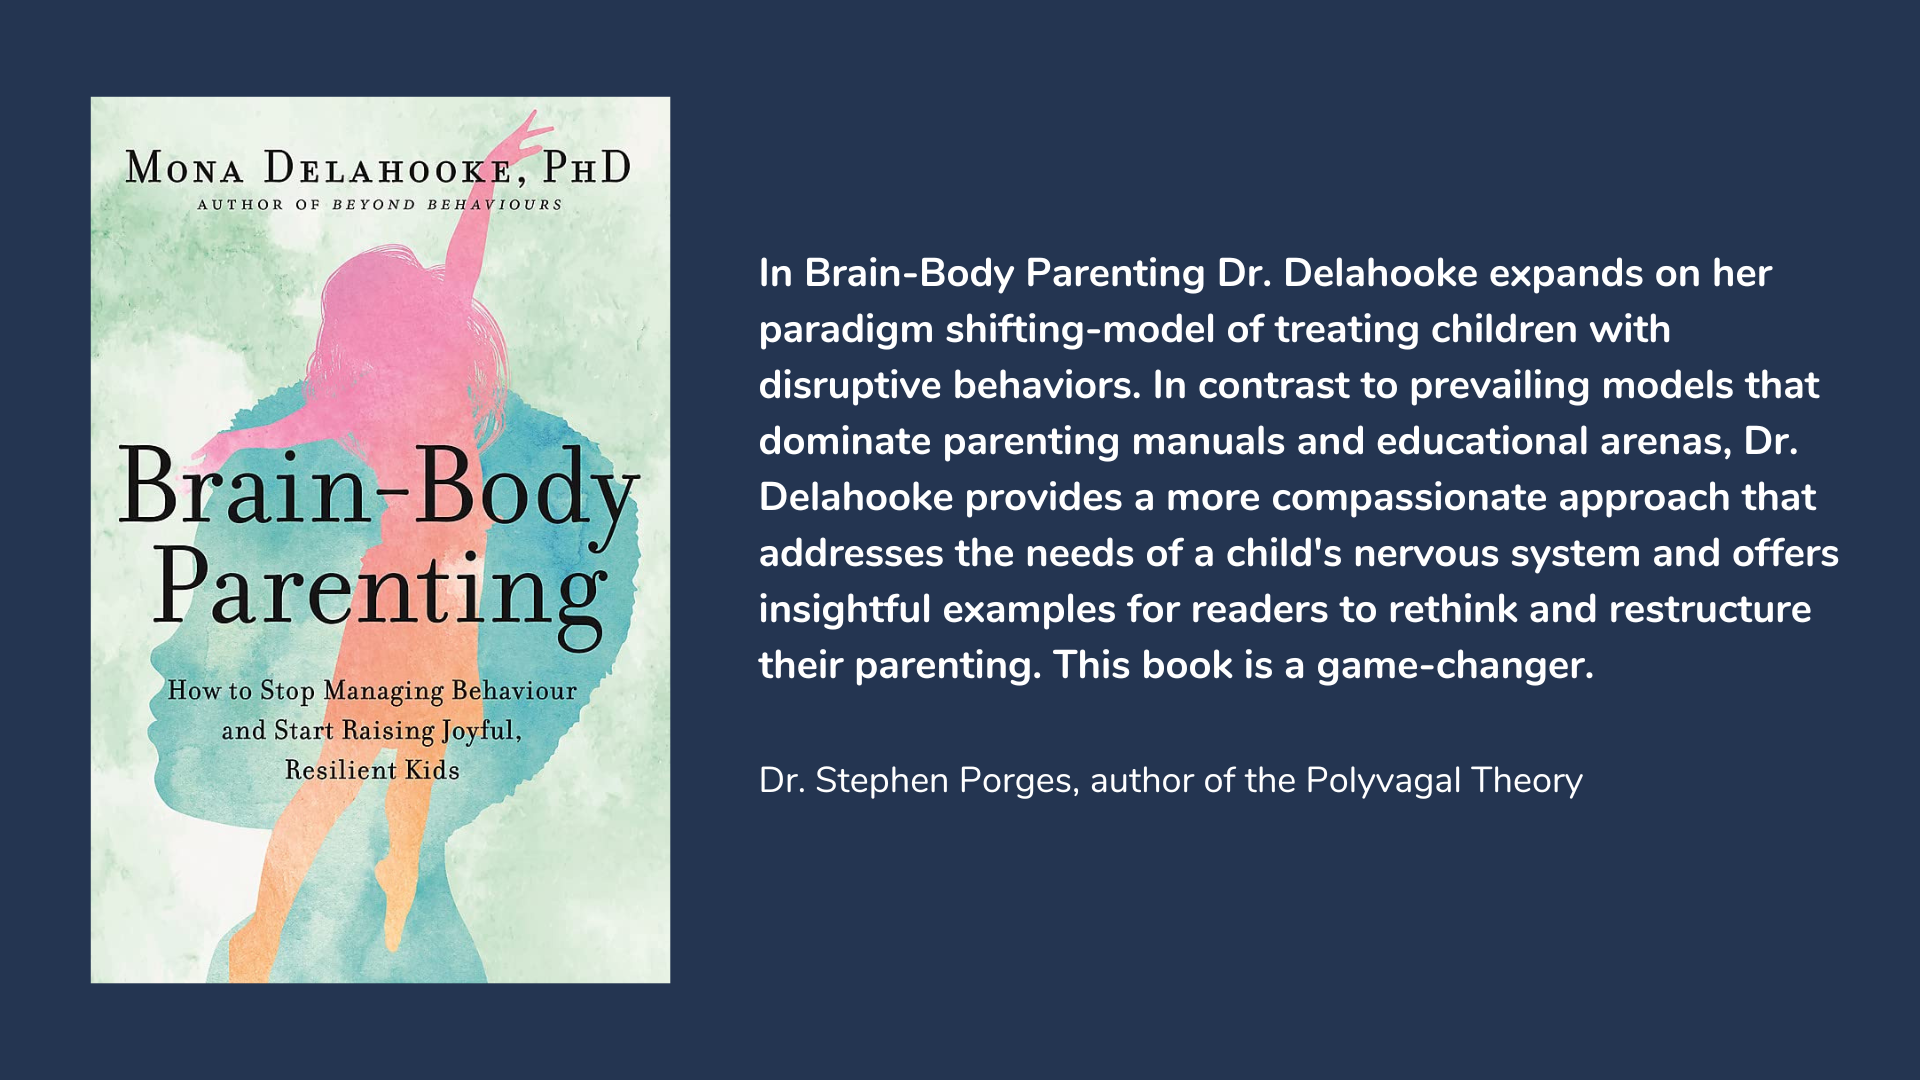 Brain-Body Parenting: How to Stop Managing Behavior and Start Raising Joyful, Resilient Kids, book cover and description.